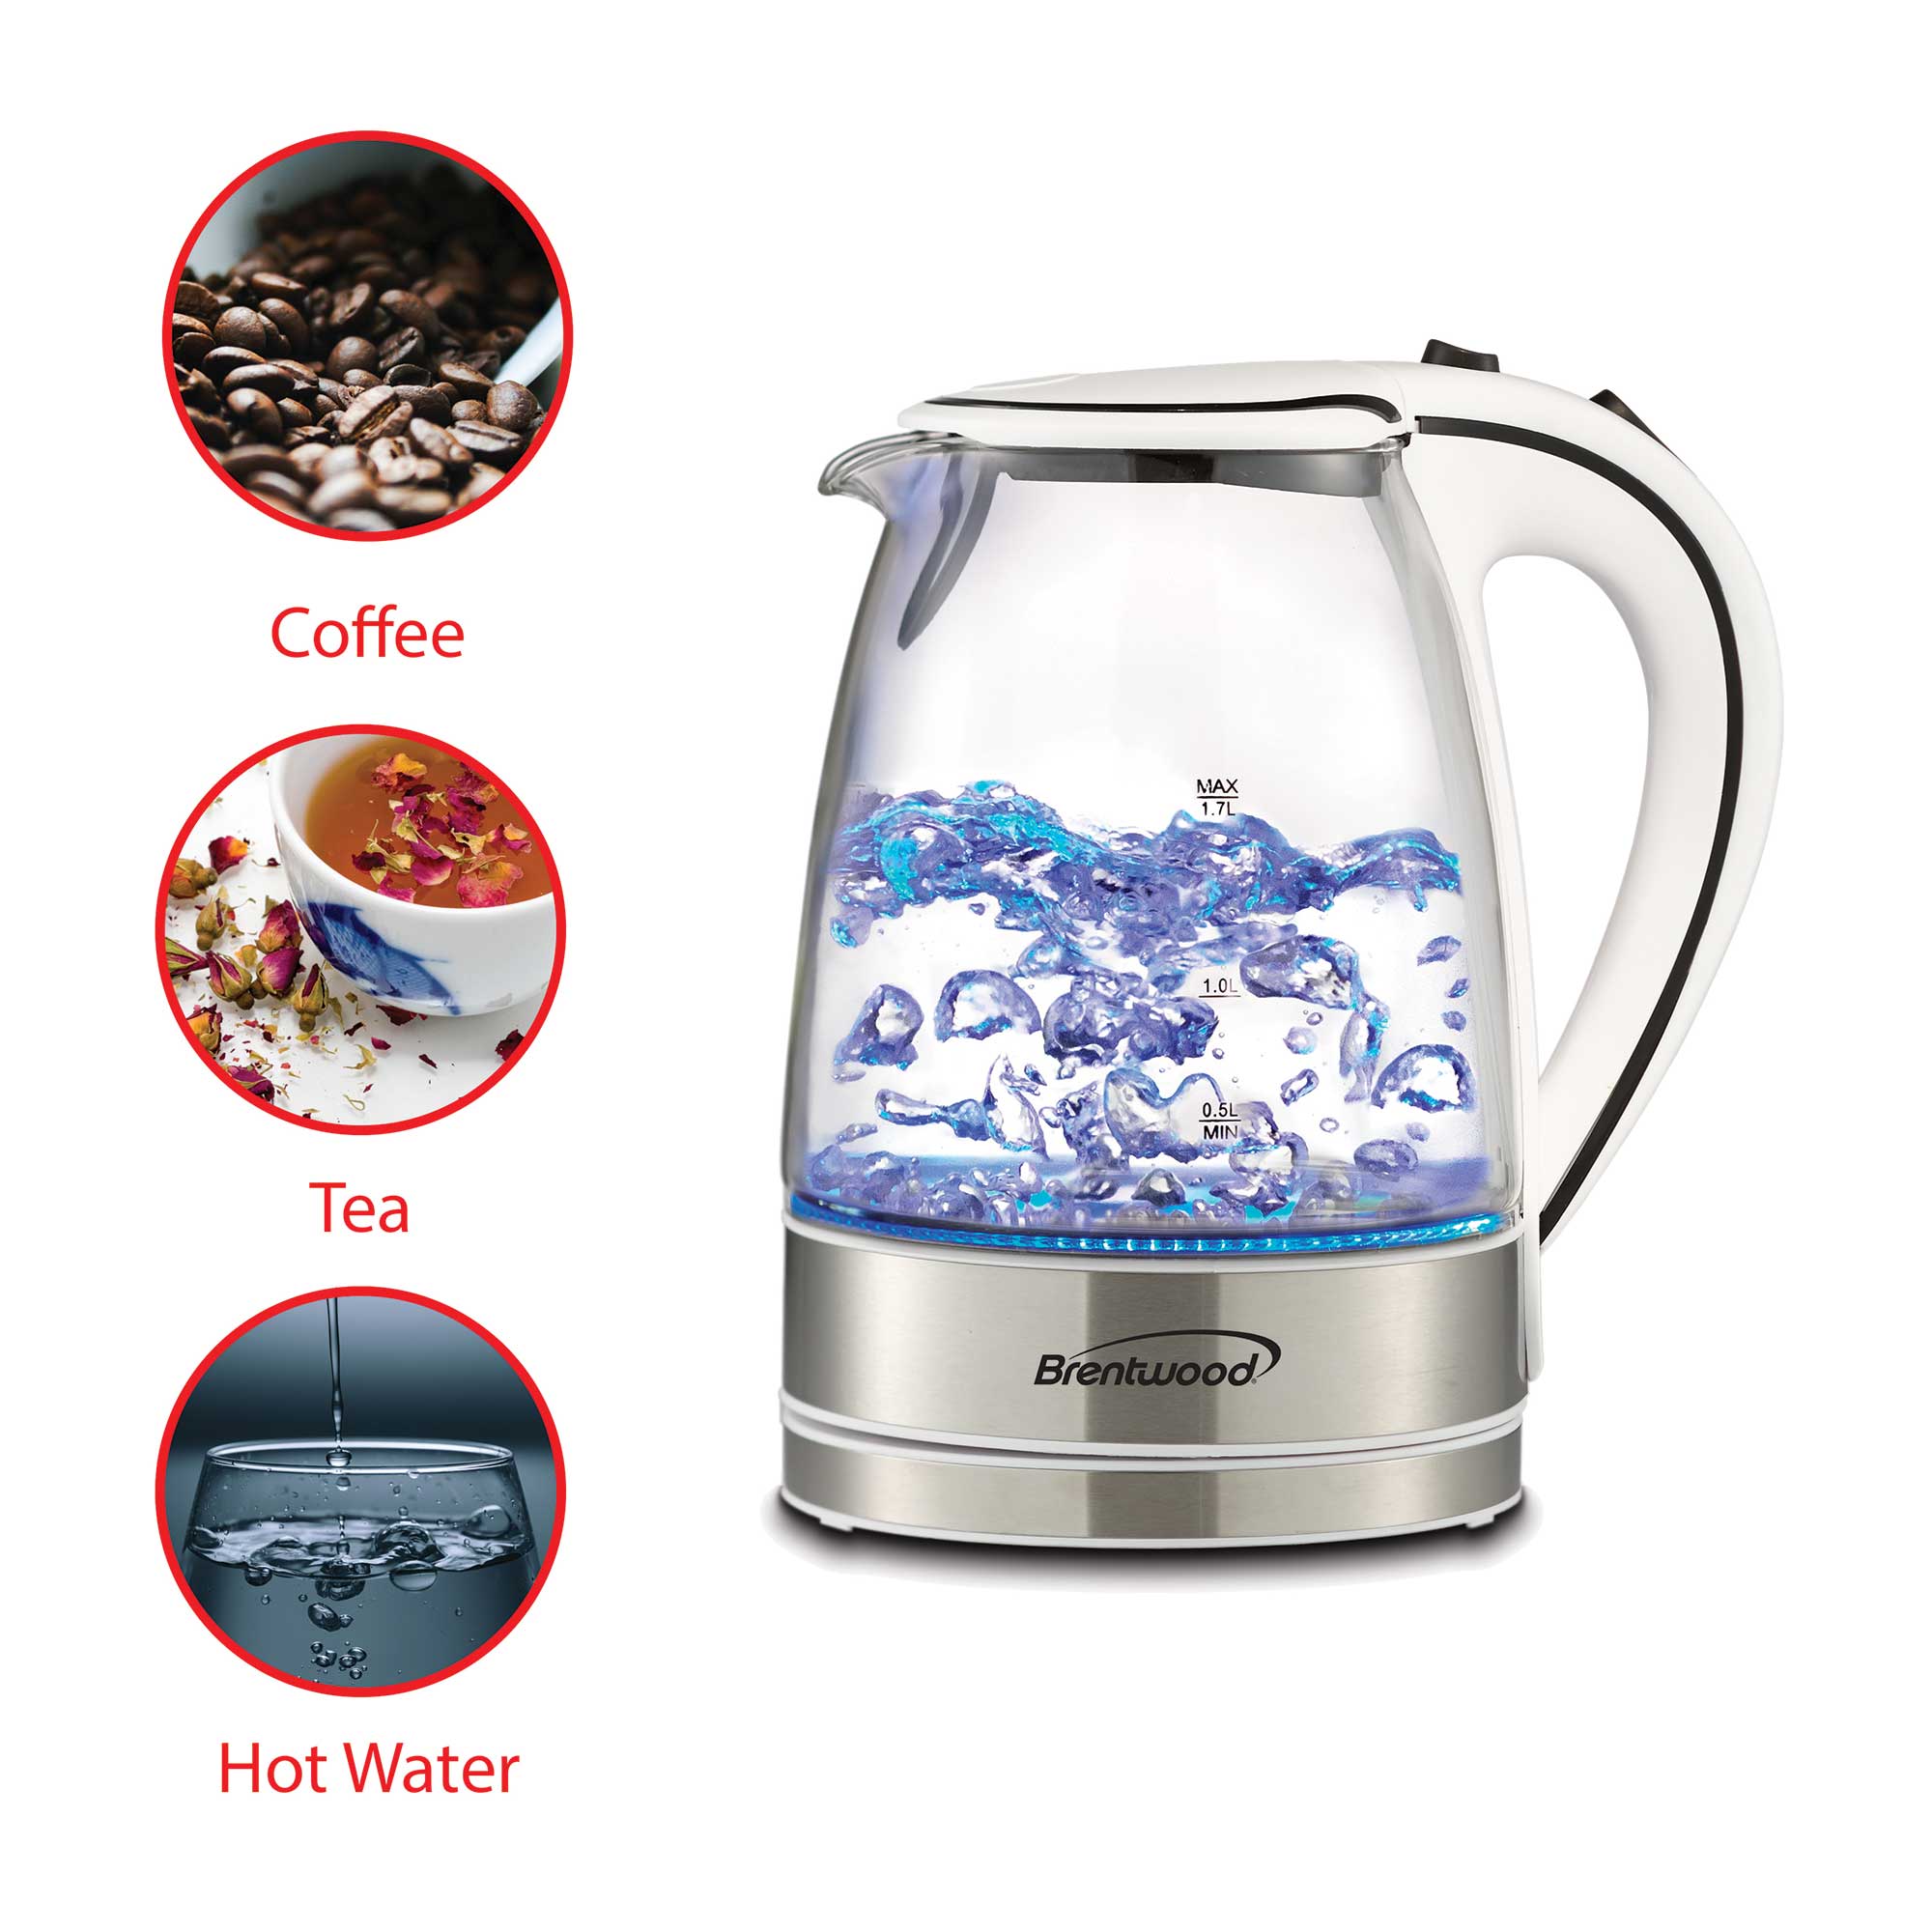 970117012M Brentwood Glass 1.7 Liter Electric Kettle with Tea Infuser in  Black